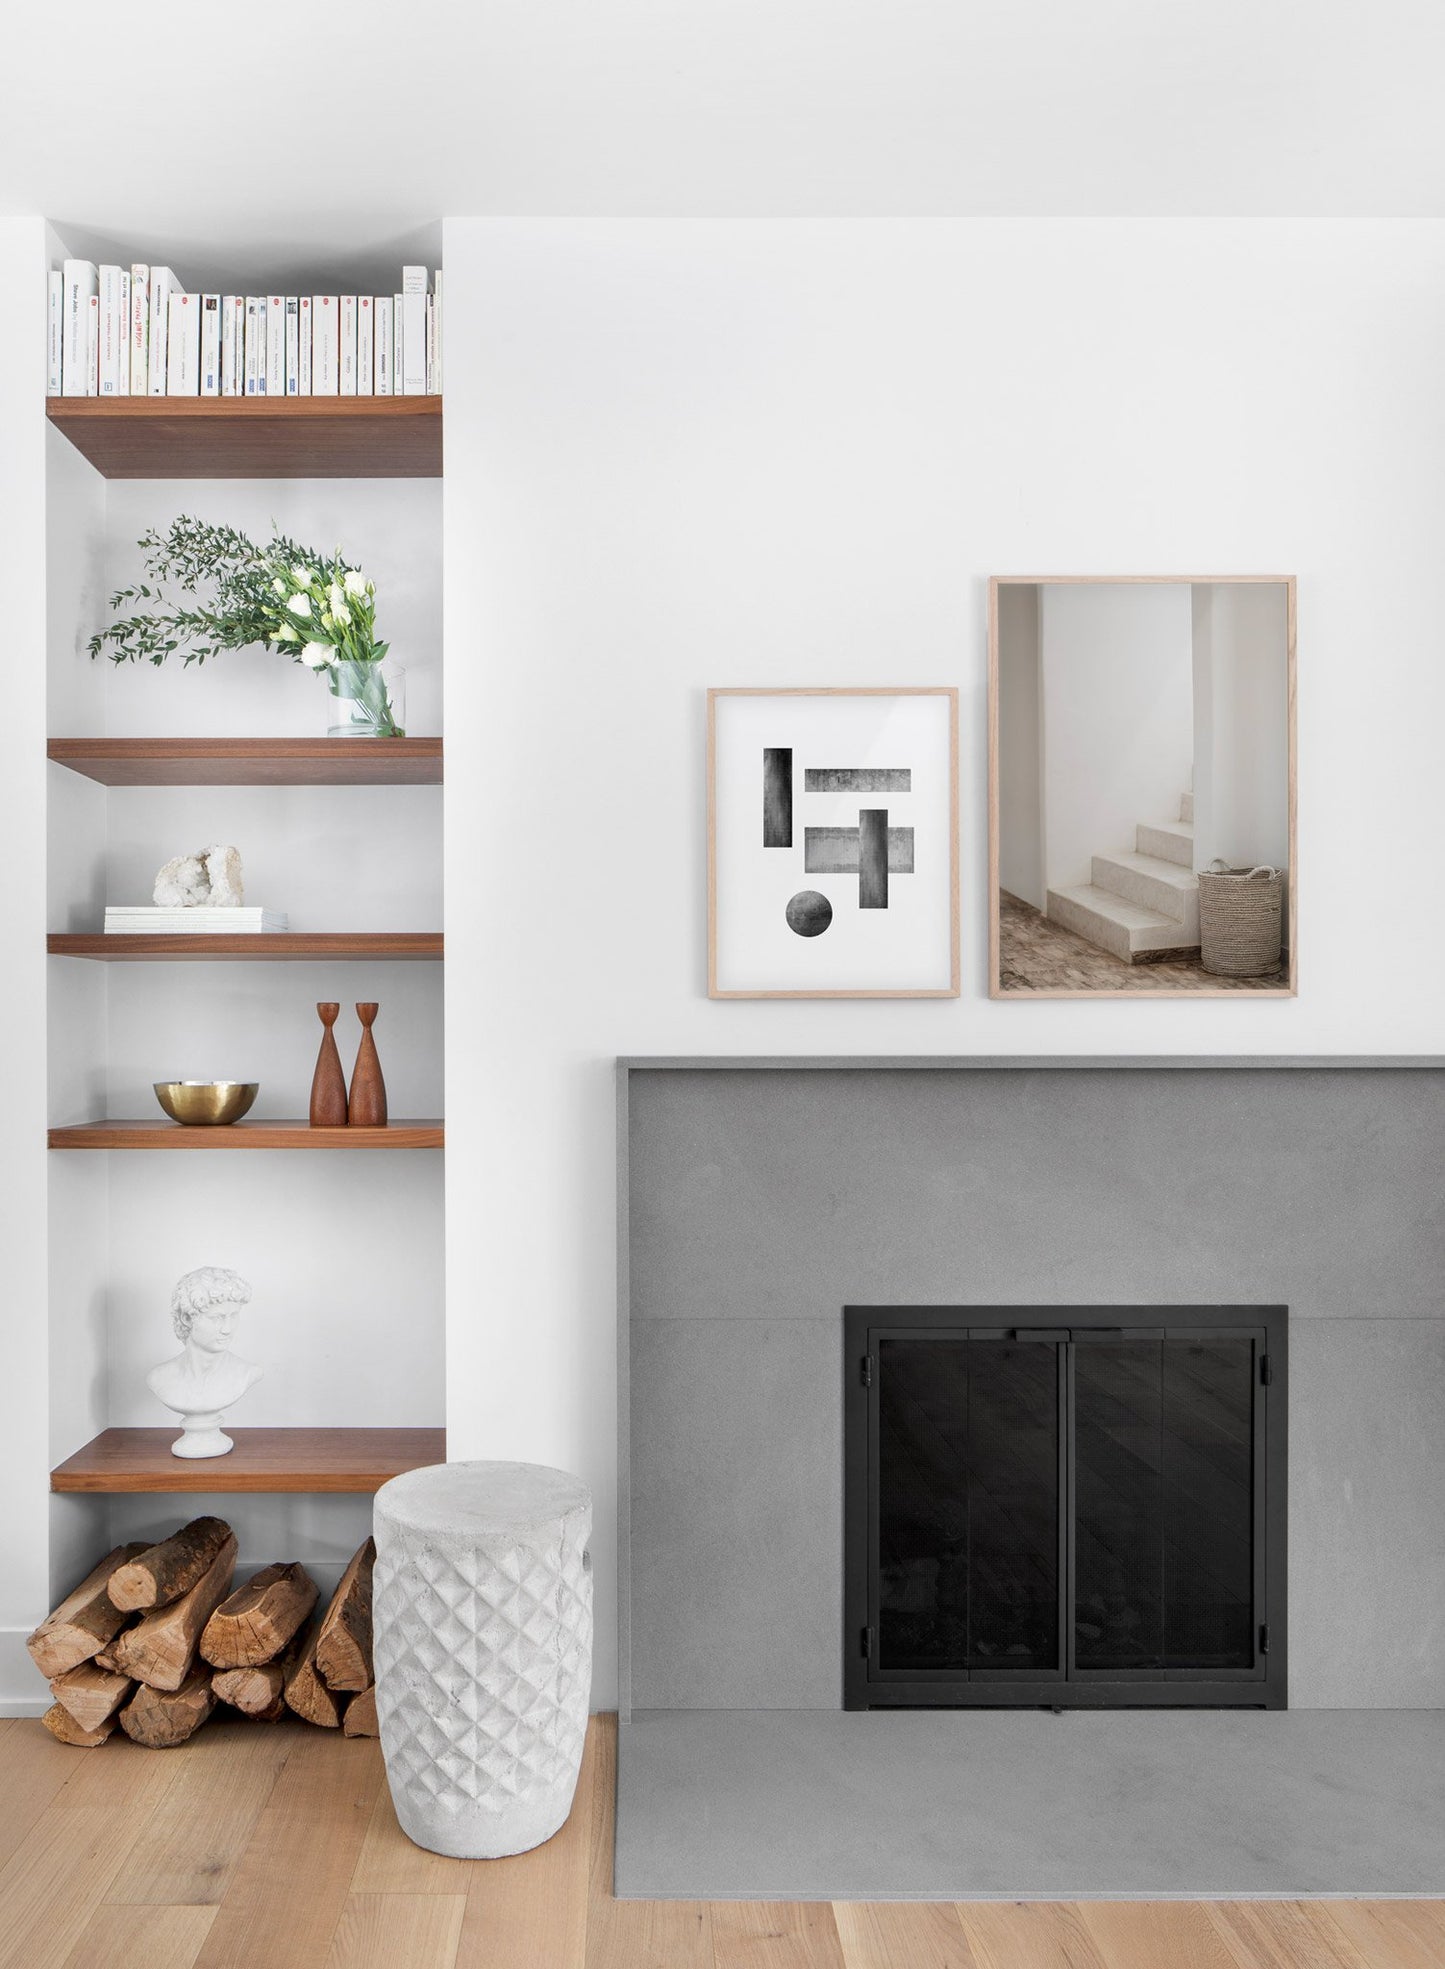 Hidden Staircase modern minimalist photography poster by Opposite Wall - Living room with a fireplace